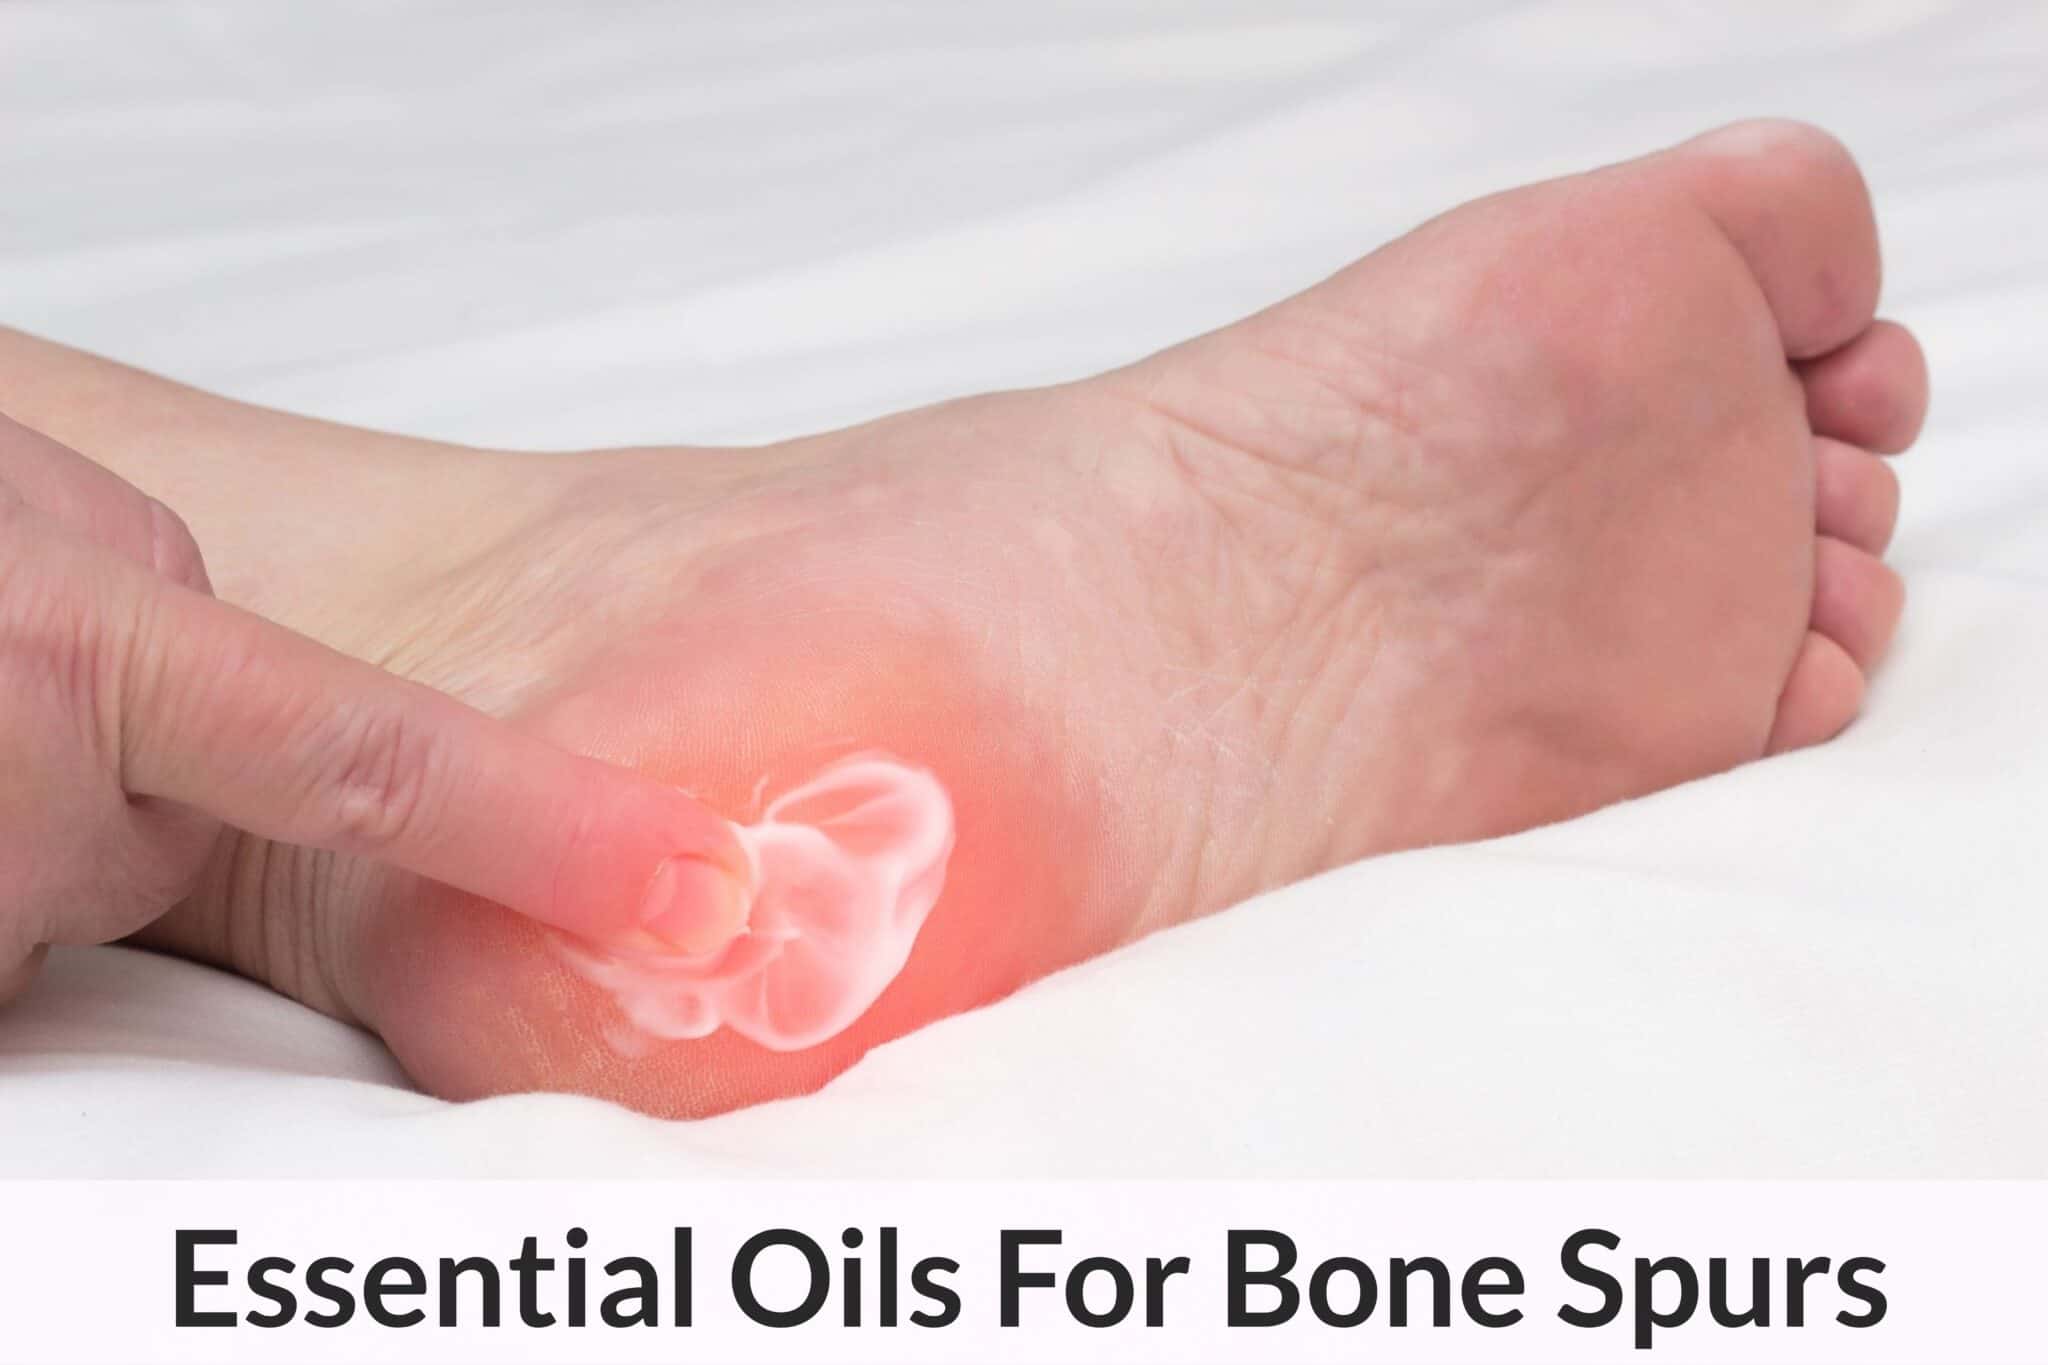 Essential Oils For Bone Spurs When Being Porcupine Boy Doesn’t Sound